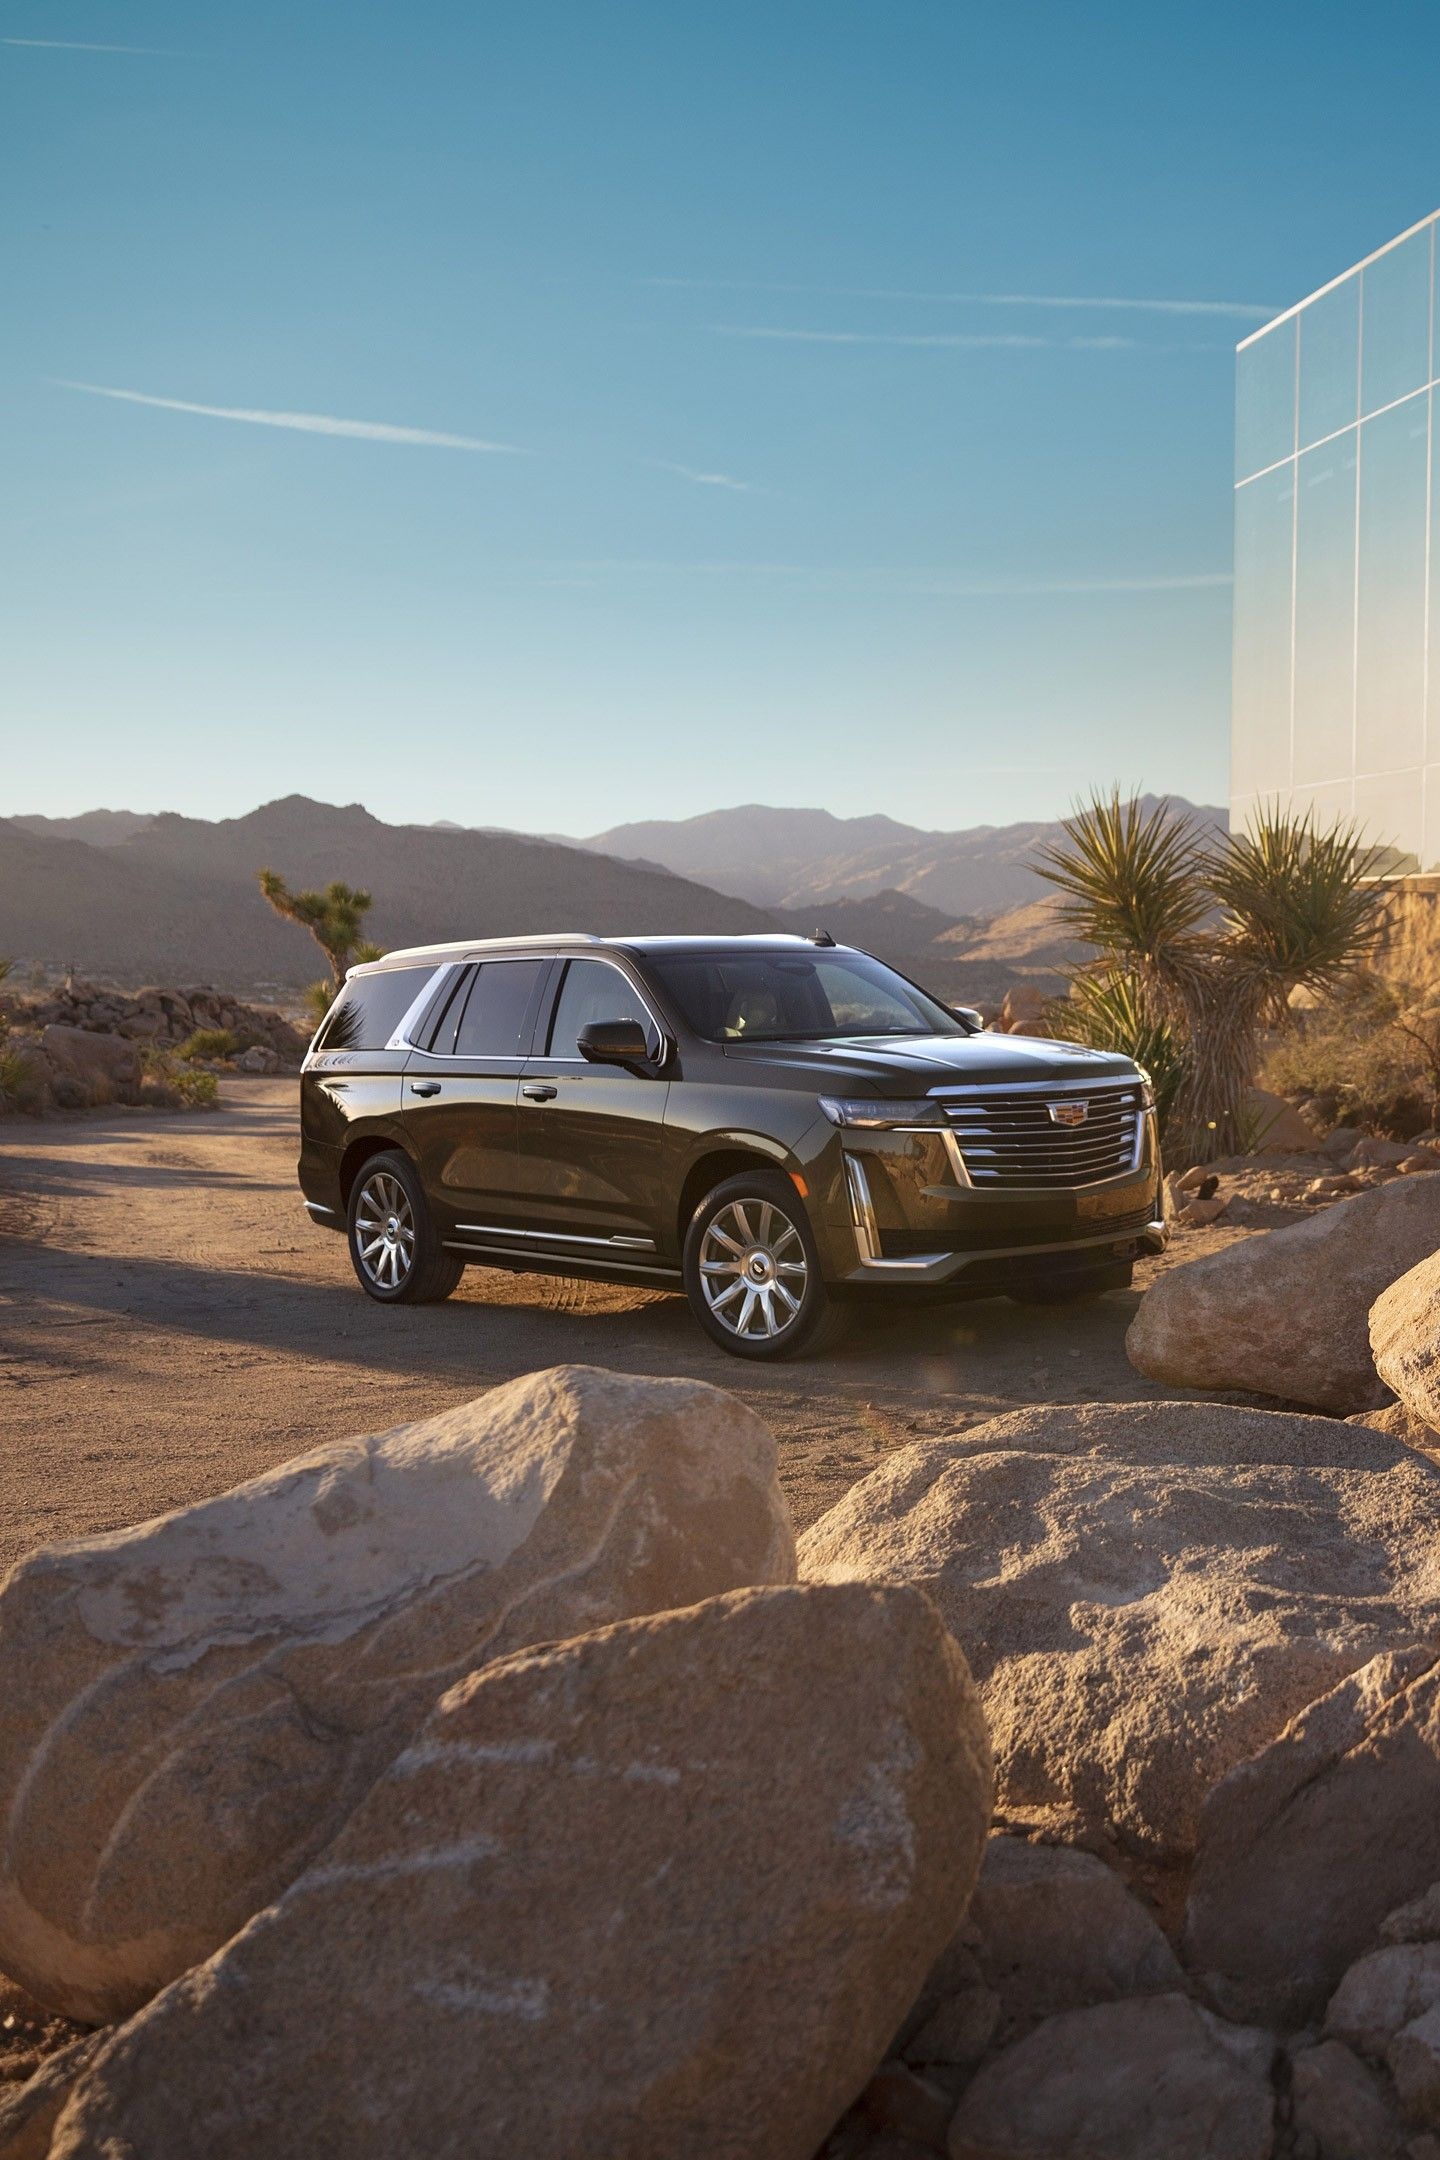 Cadillac Escalade, iPhone uhd 4k wallpapers, Download now, Pin it, 1440x2160 HD Phone